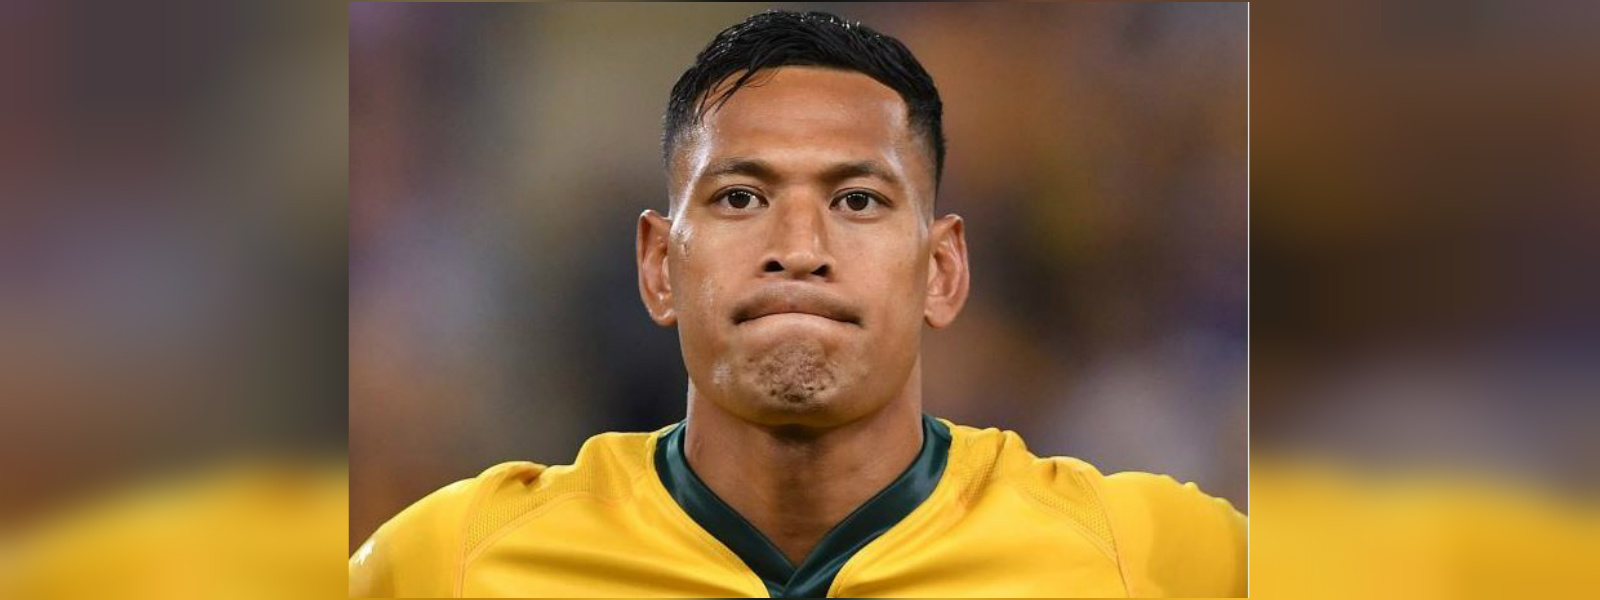 Israel Folau’s legal team ‘very pleased’ with directions hearing